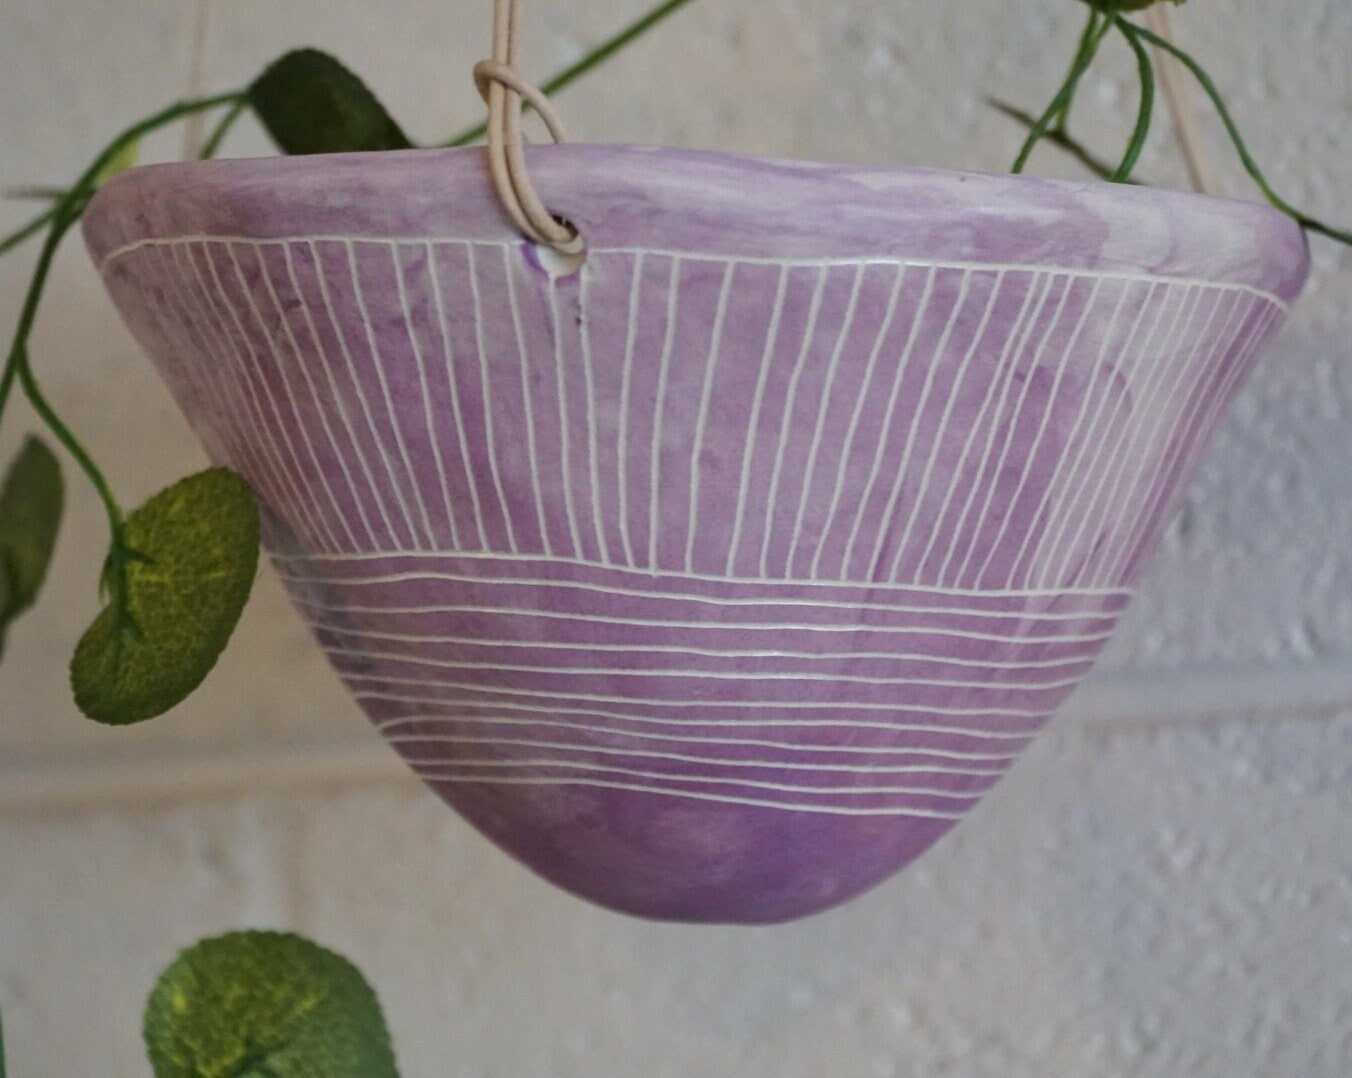 Purple & White Hanging Planter w/ "Directional Line" Design - Glazed - Hanging Pot with Carvings - Succulent, Cactus, Herb, Air Plant, Etc